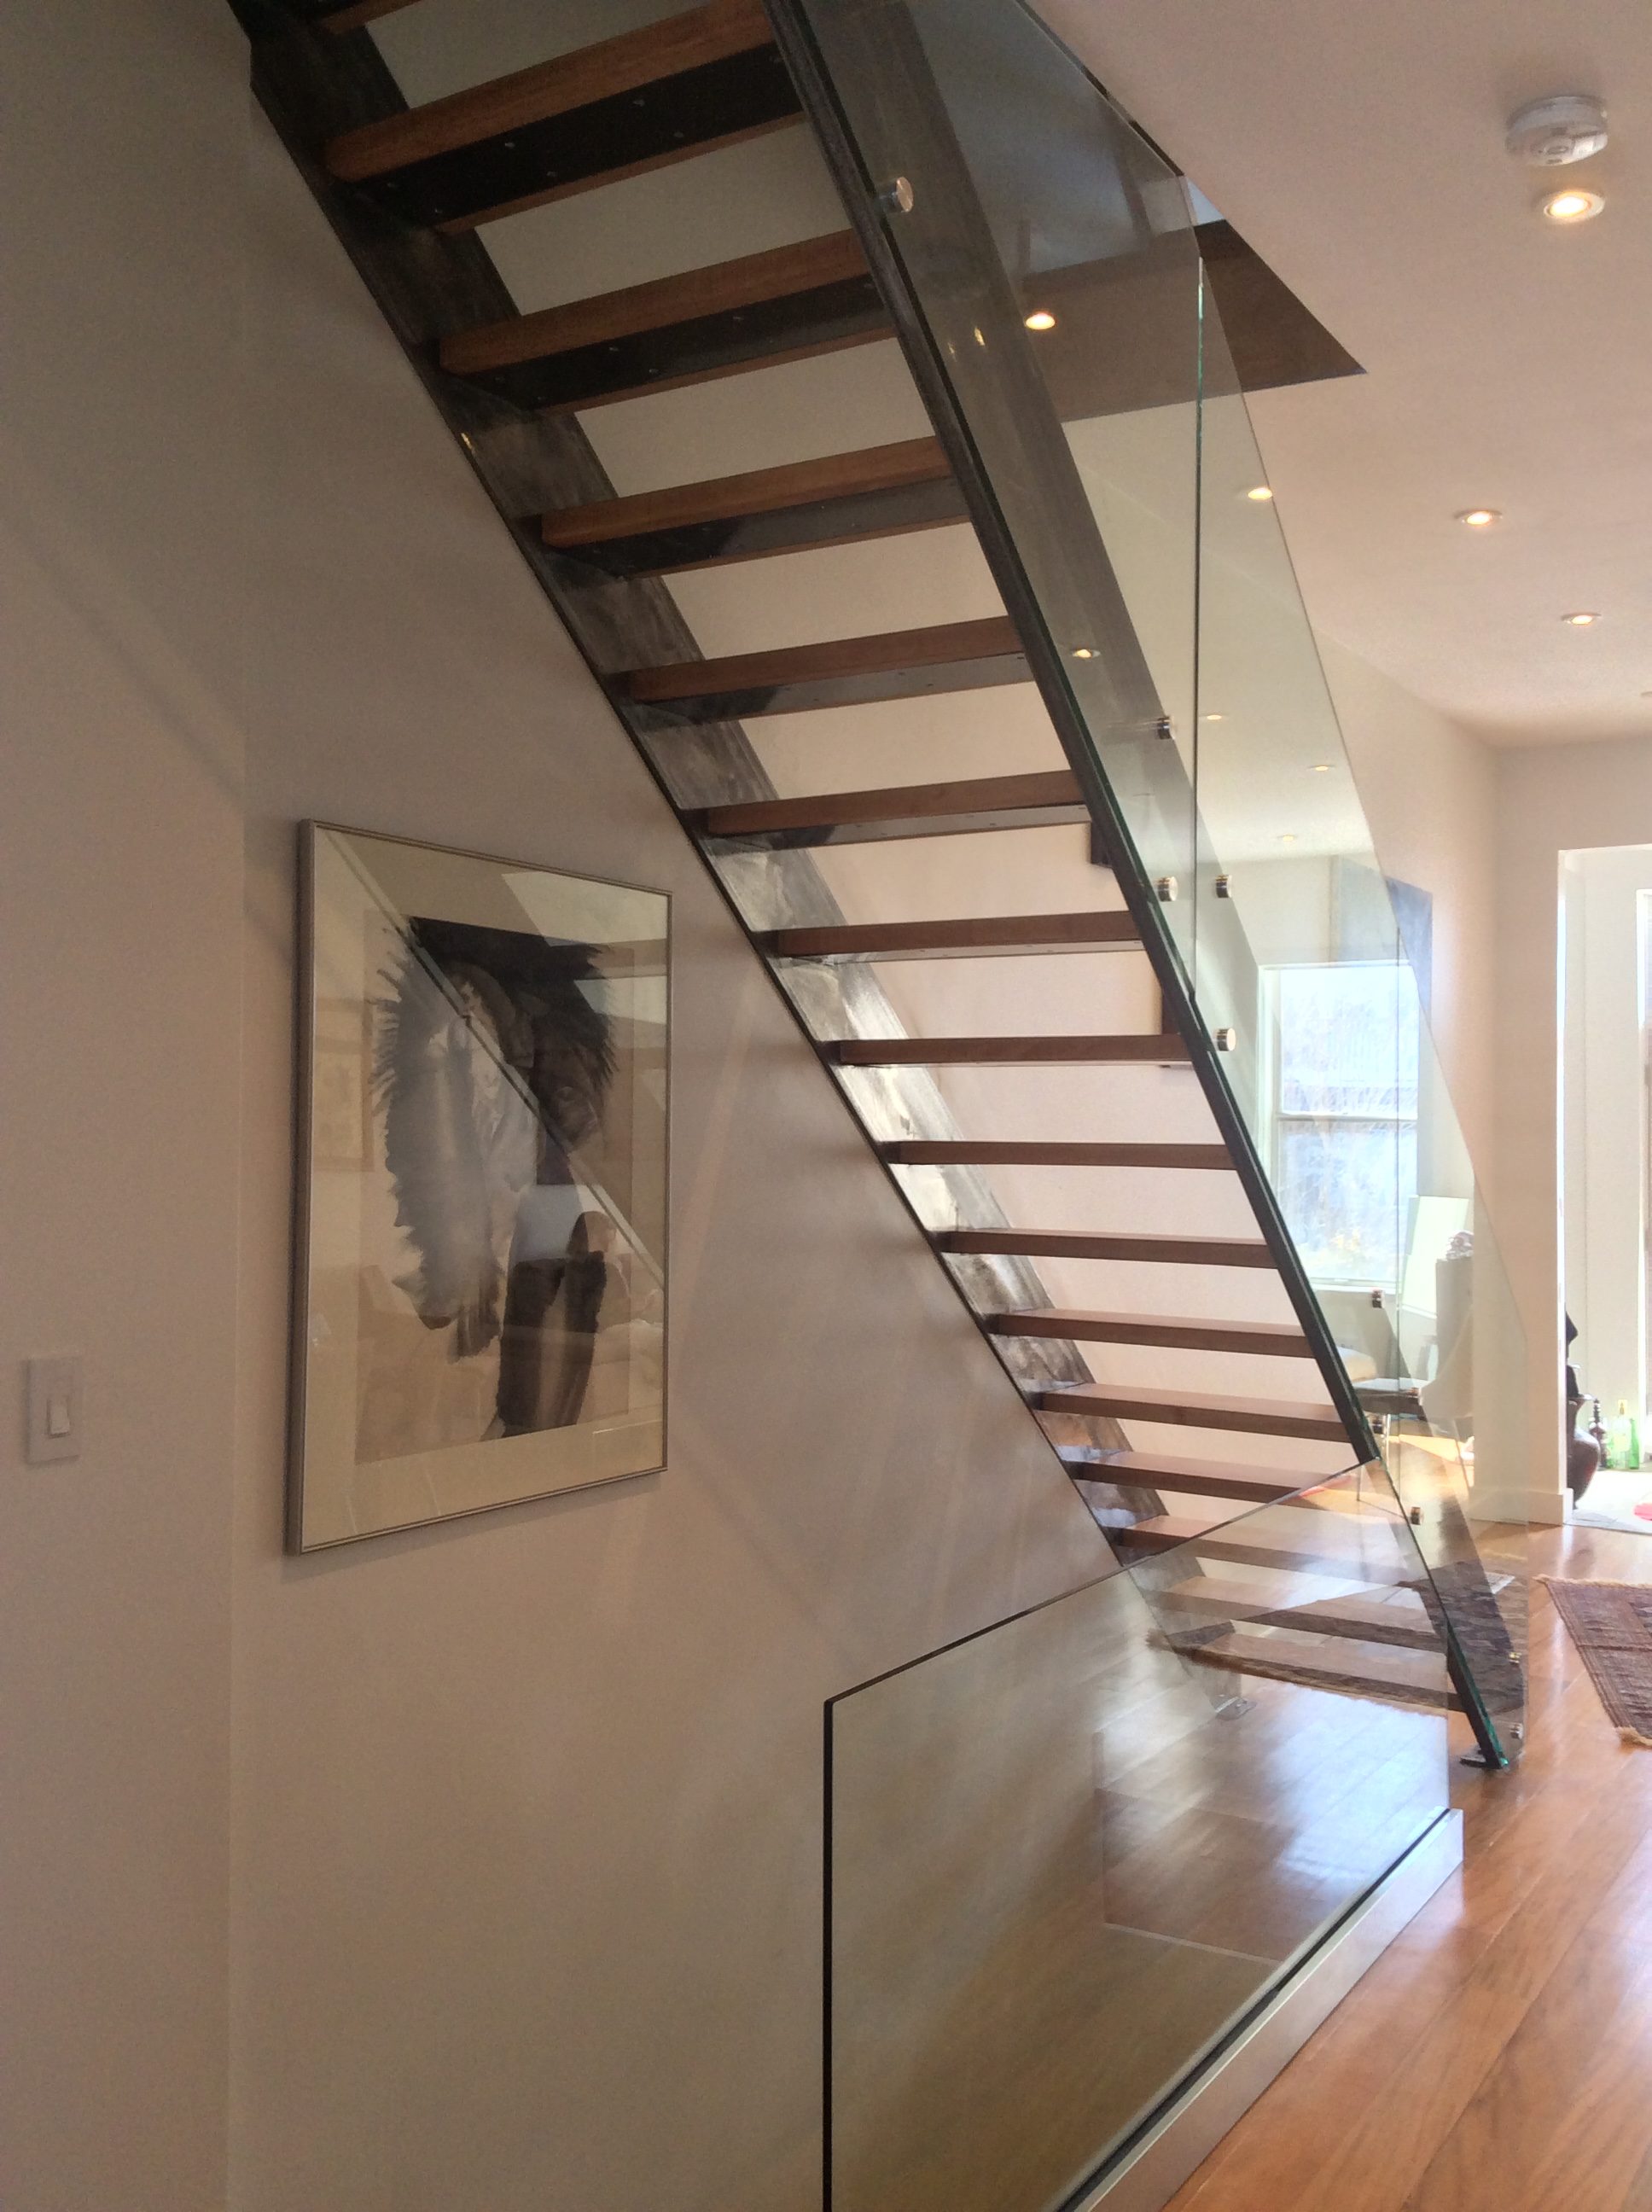 Wrought Iron Stair Railing with Glass Railings